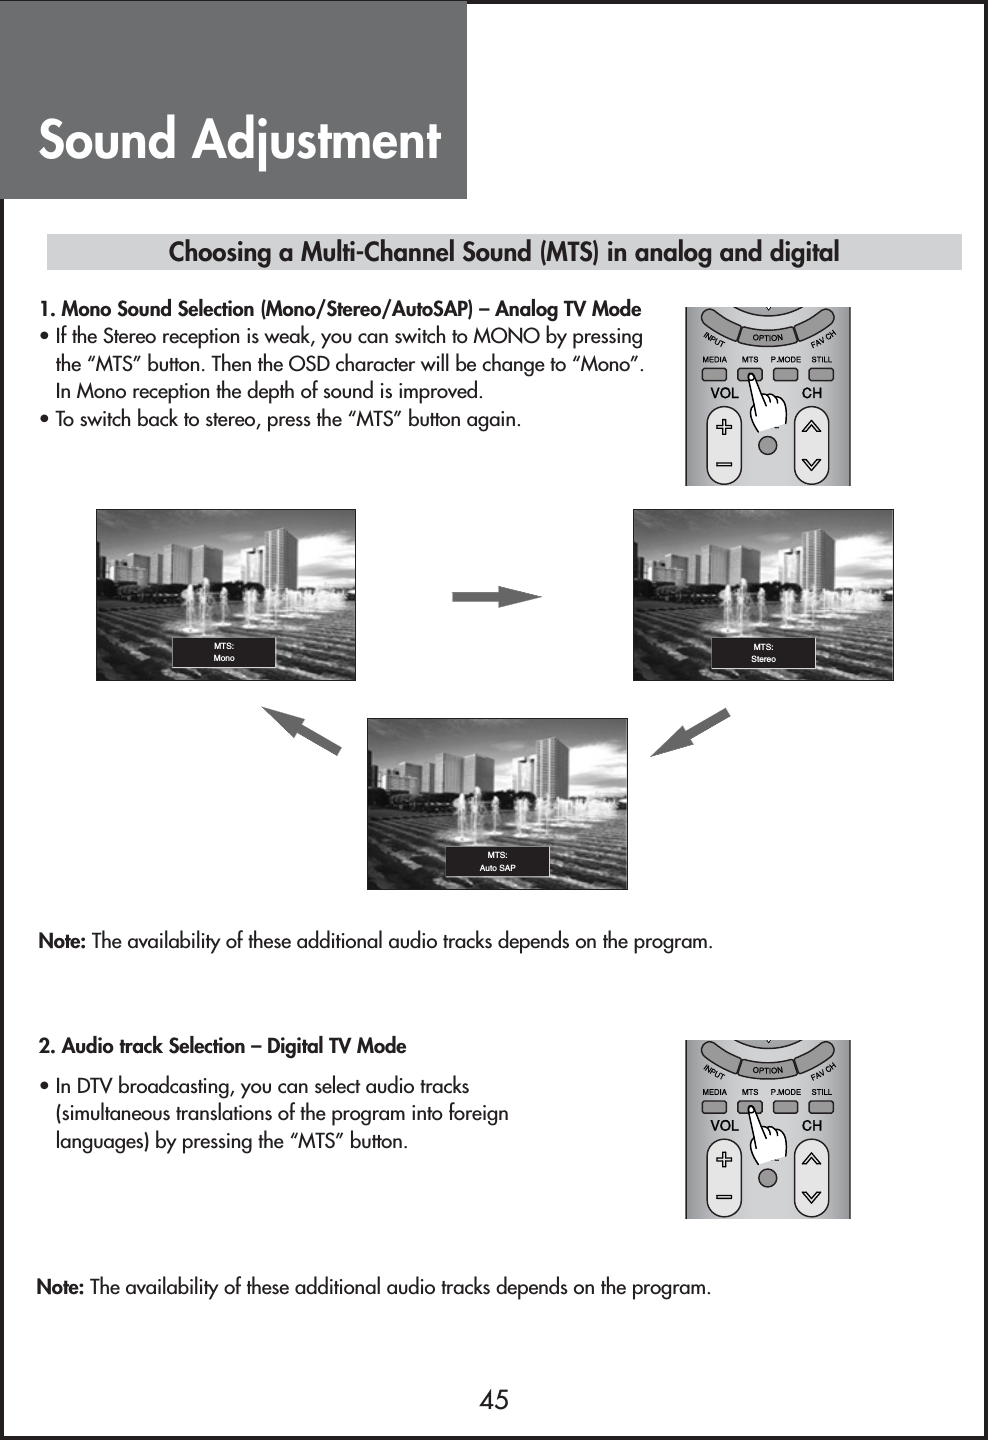 Sound Adjustment45Note: The availability of these additional audio tracks depends on the program.• In DTV broadcasting, you can select audio tracks(simultaneous translations of the program into foreignlanguages) by pressing the “MTS” button.Choosing a Multi-Channel Sound (MTS) in analog and digital1. Mono Sound Selection (Mono/Stereo/AutoSAP) – Analog TV Mode• If the Stereo reception is weak, you can switch to MONO by pressingthe “MTS” button. Then the OSD character will be change to “Mono”.In Mono reception the depth of sound is improved.• To switch back to stereo, press the “MTS” button again.Note: The availability of these additional audio tracks depends on the program.2. Audio track Selection – Digital TV ModeMTS:MonoMTS:Auto SAPMTS:Stereo